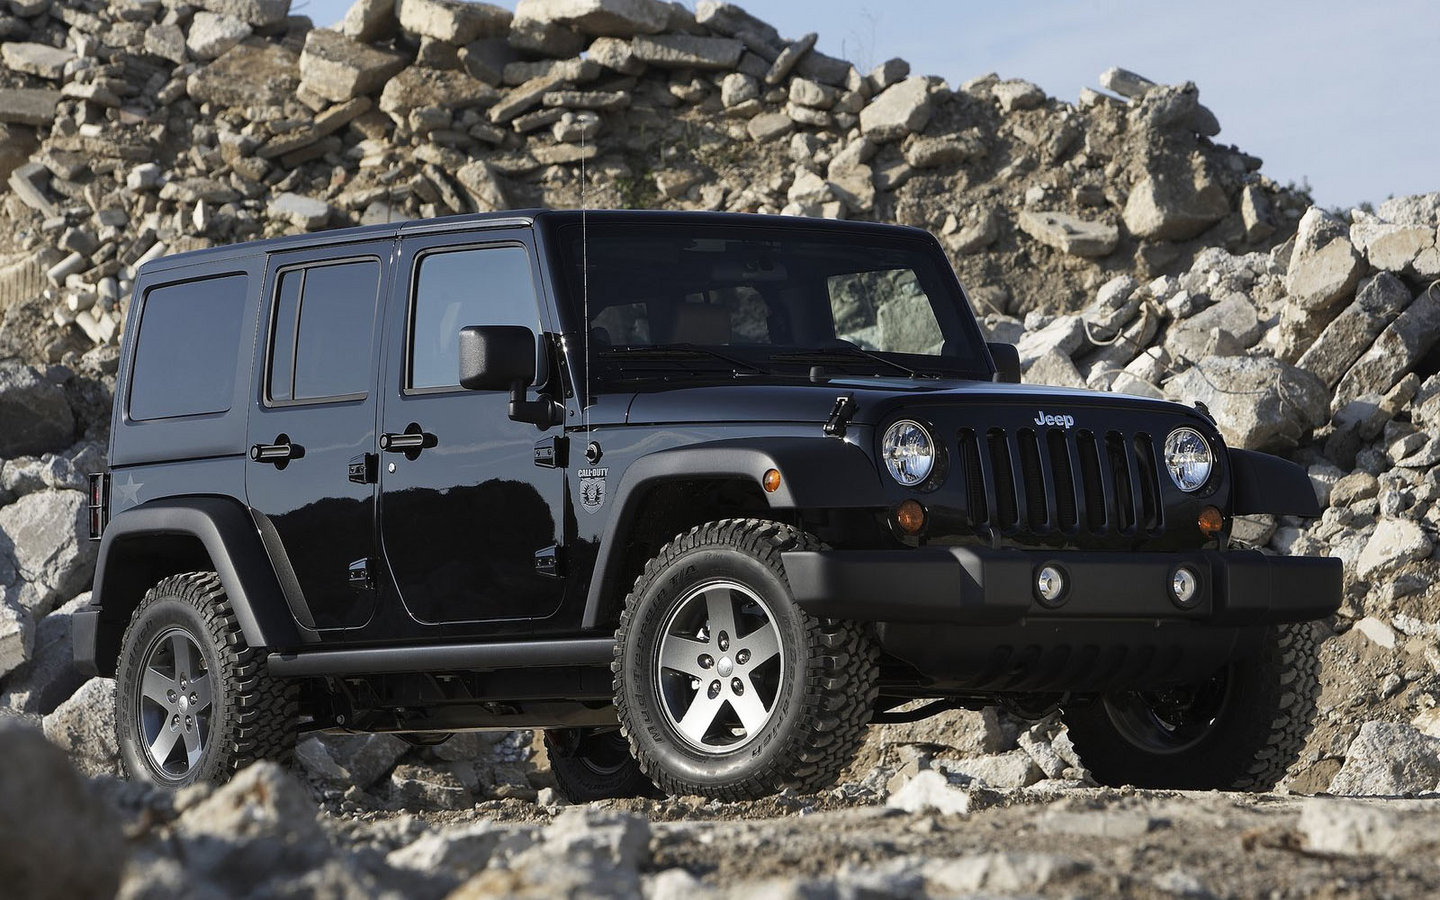 Factory jeep hard tops #4